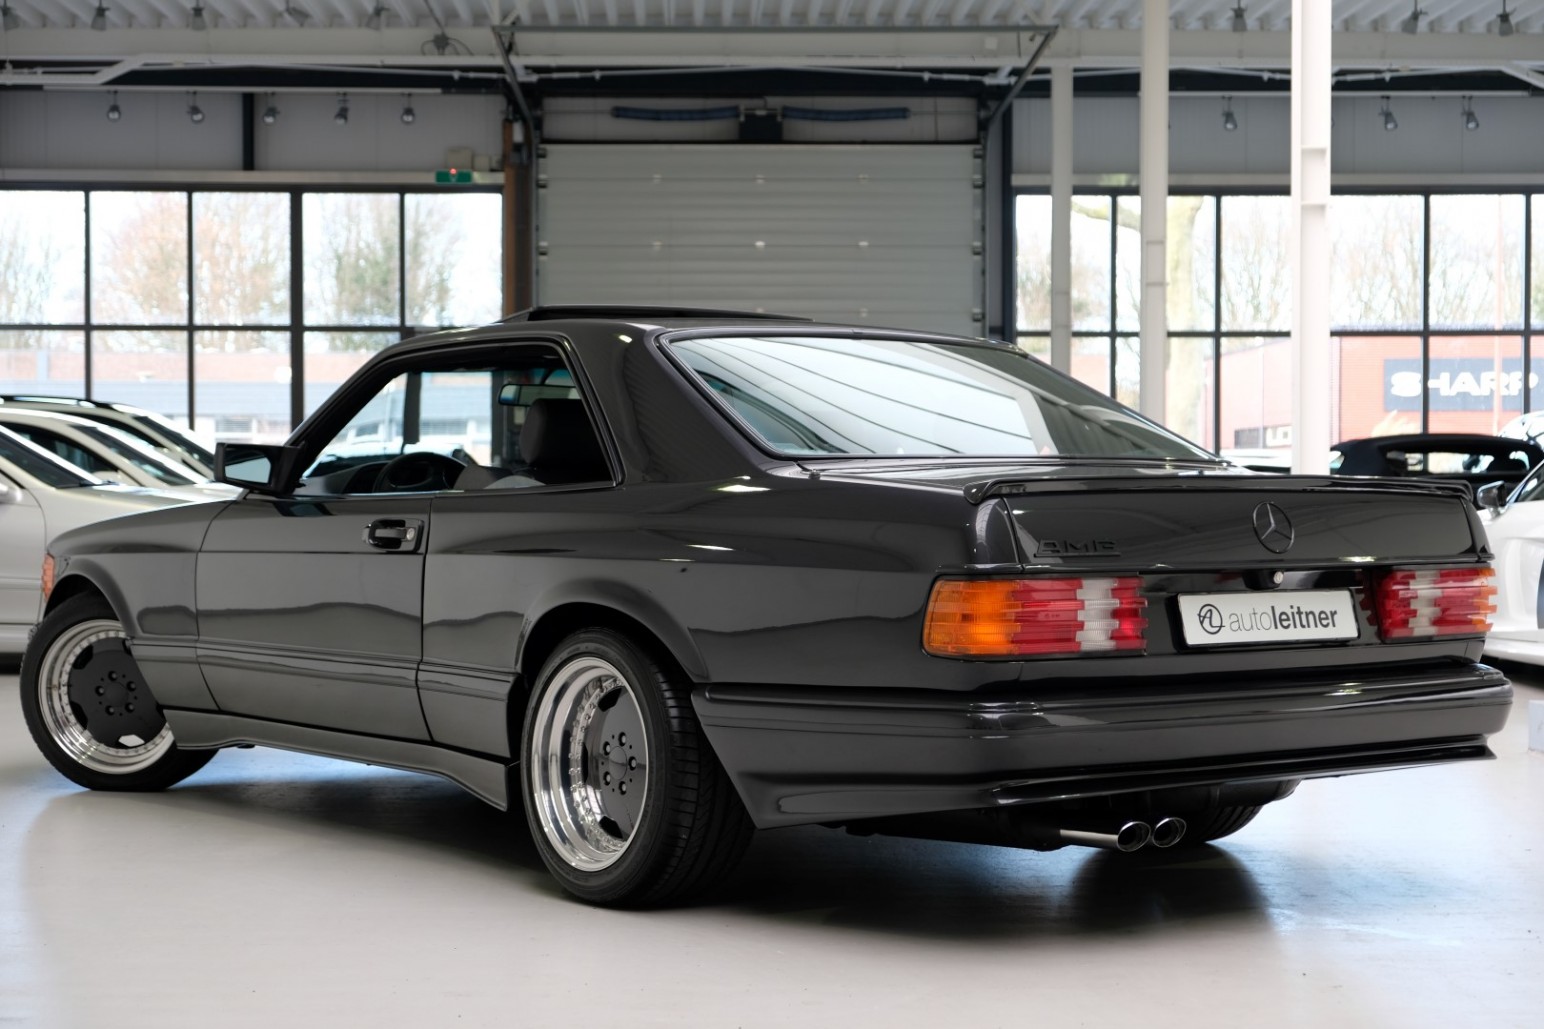 19 Mercedes 560 Sec Amg 6 0 Widebody Is Intimidating And So Is Its Price Carscoops